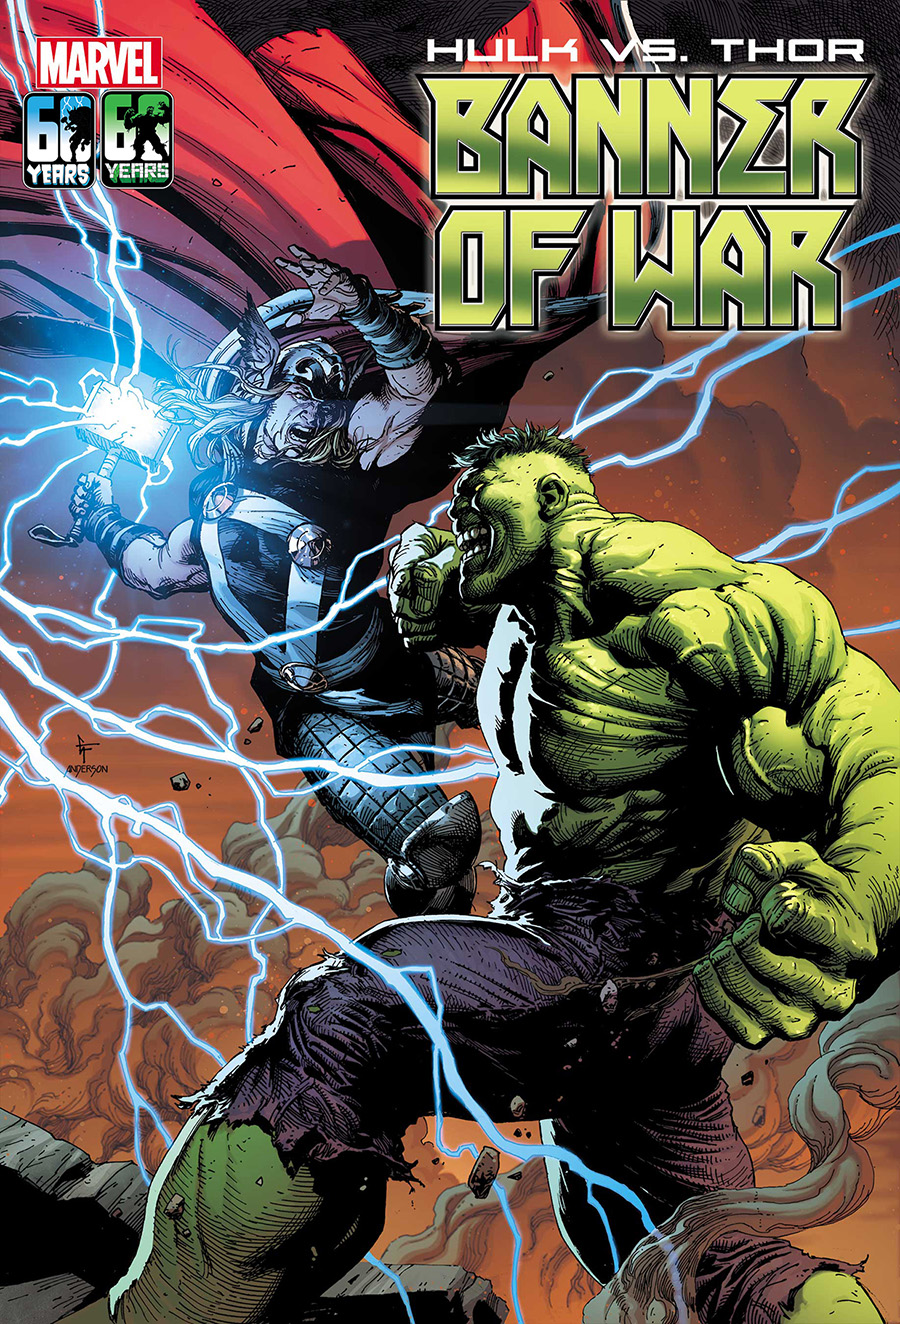 Hulk vs Thor Banner Of War Alpha #1 (One Shot) DF Gold Signature Series Signed By Donny Cates Plus 1